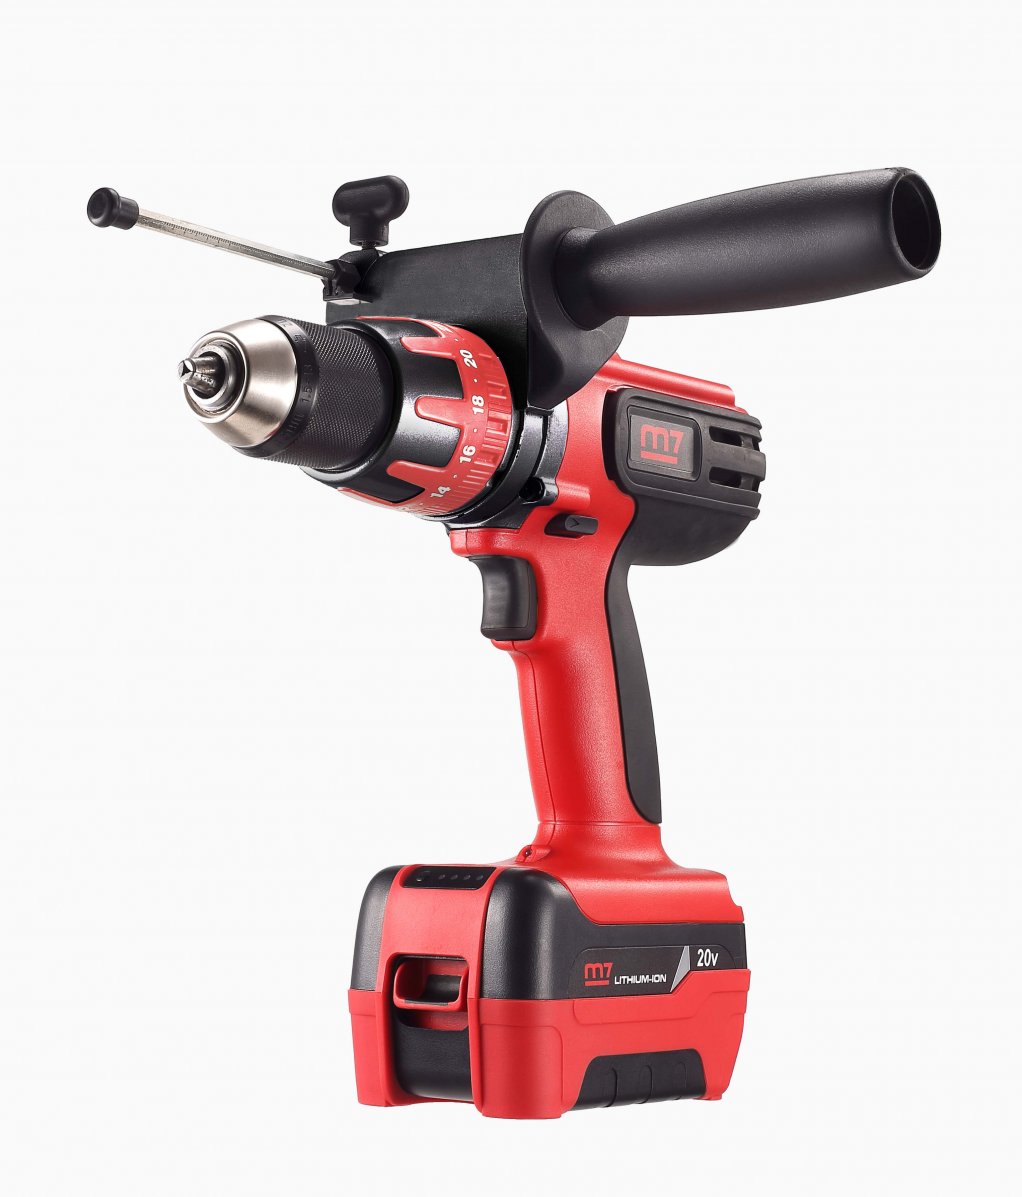 MIGHTY SEVEN CORDLESS HAMMER DRILL/SCREWDRIVER
The hammer option allows for working on harder surfaces
